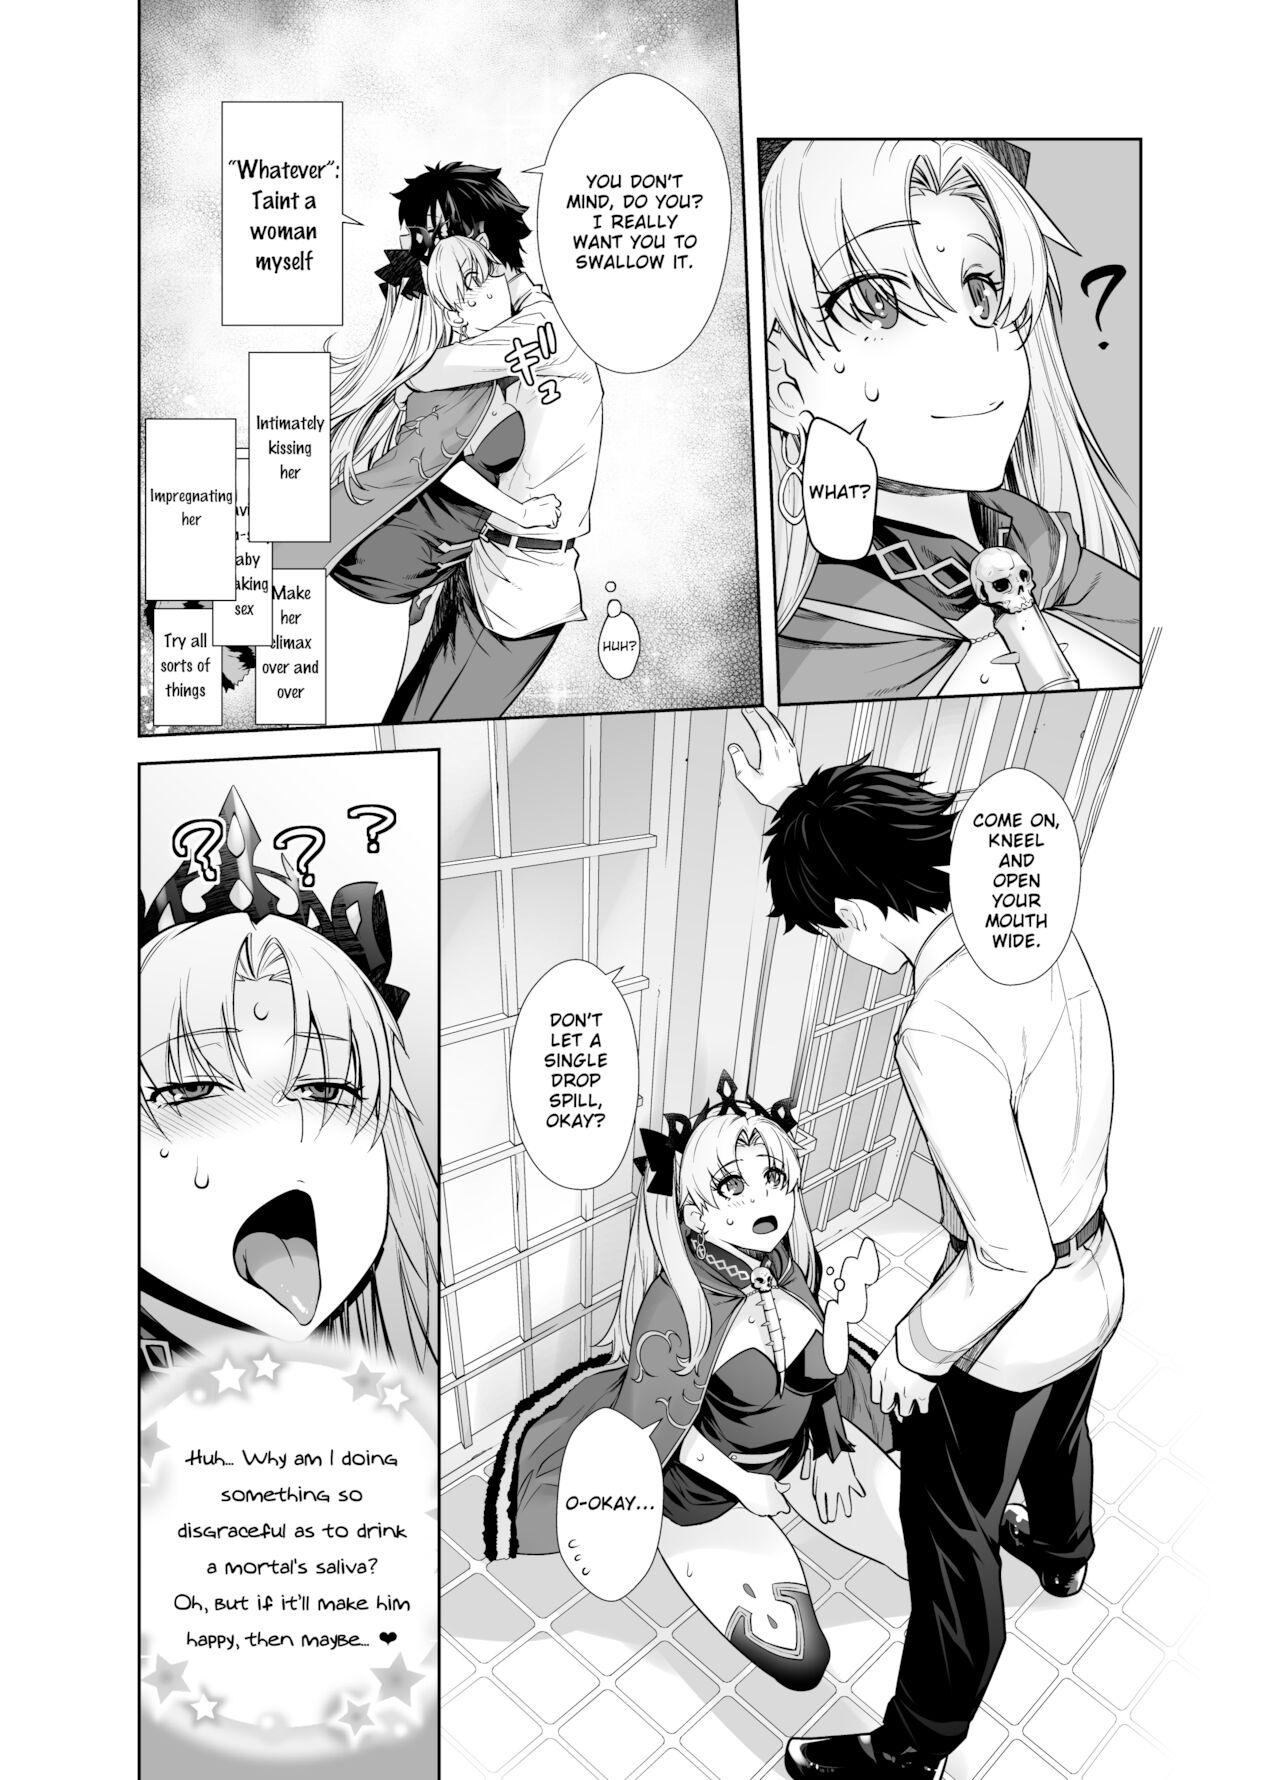 Skinny HEAVEN'S DRIVE 9 - Fate grand order Audition - Page 7